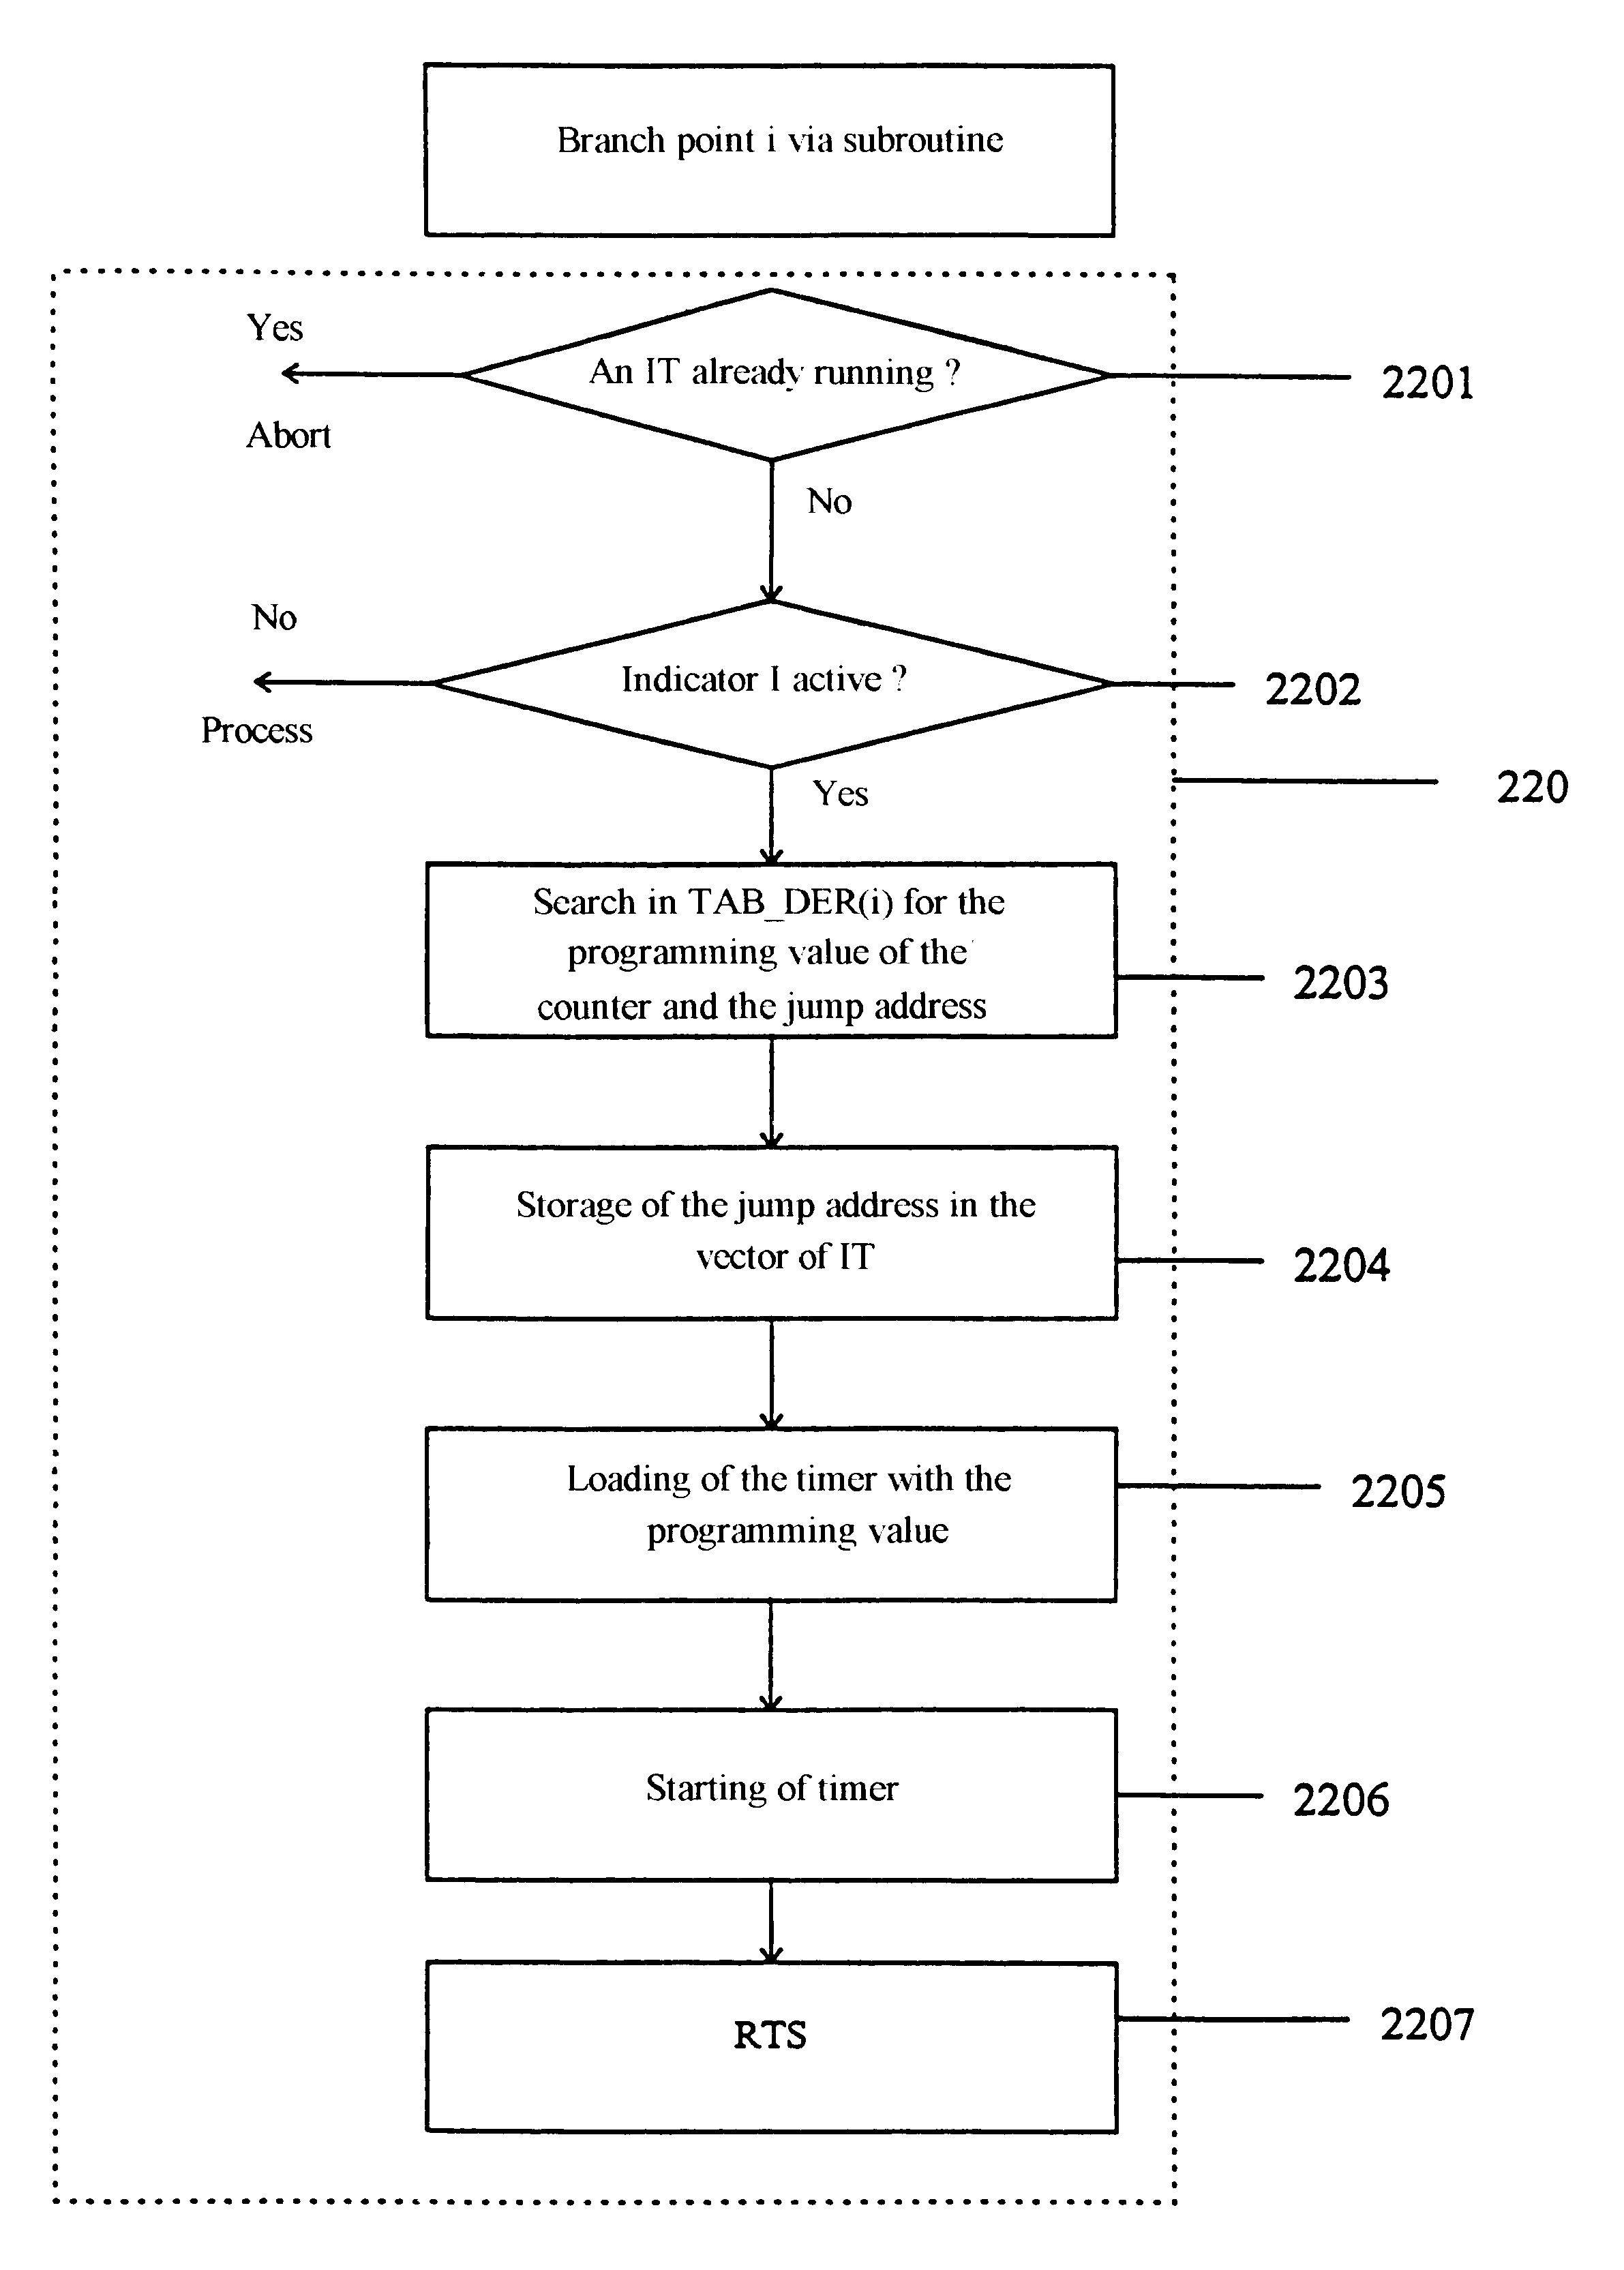 Method for modifying code sequences and related device